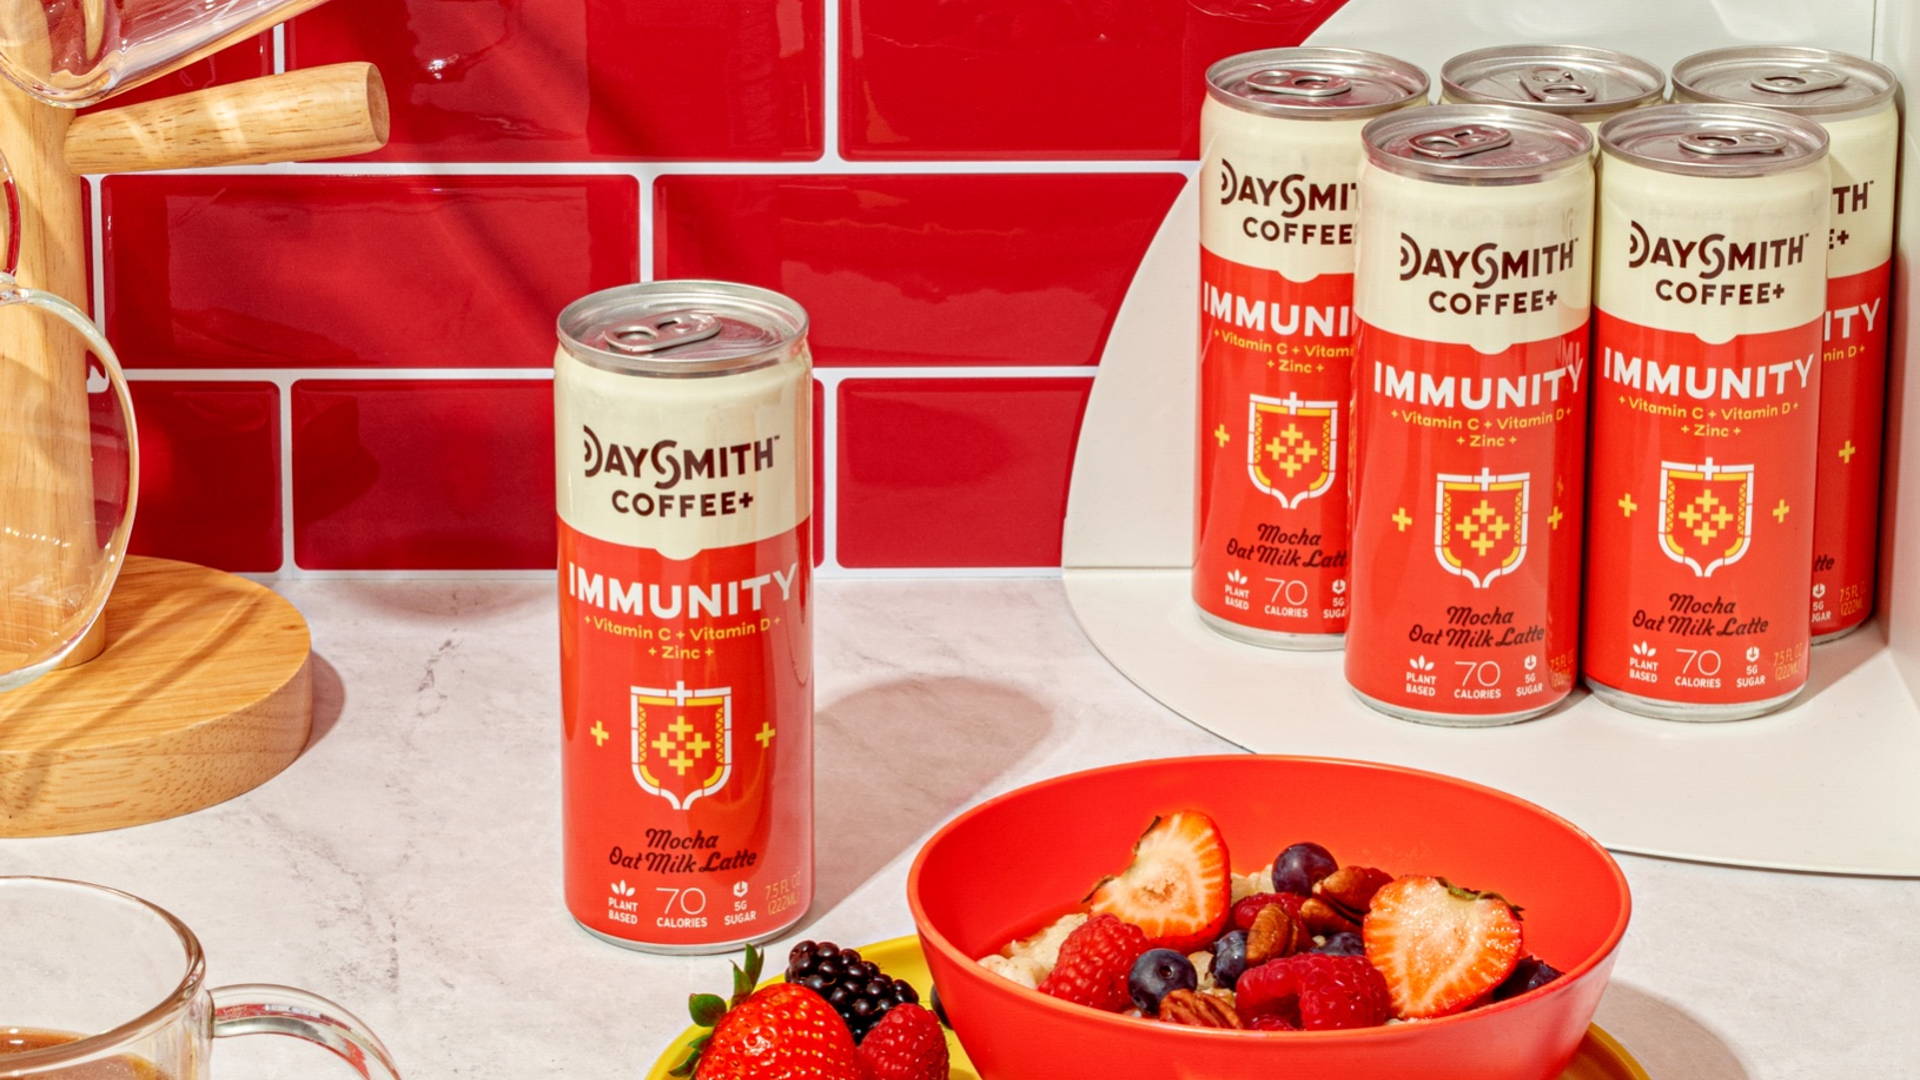 Featured image for Daysmith Coffee's Packaging Has True Purpose Instilled In The Design